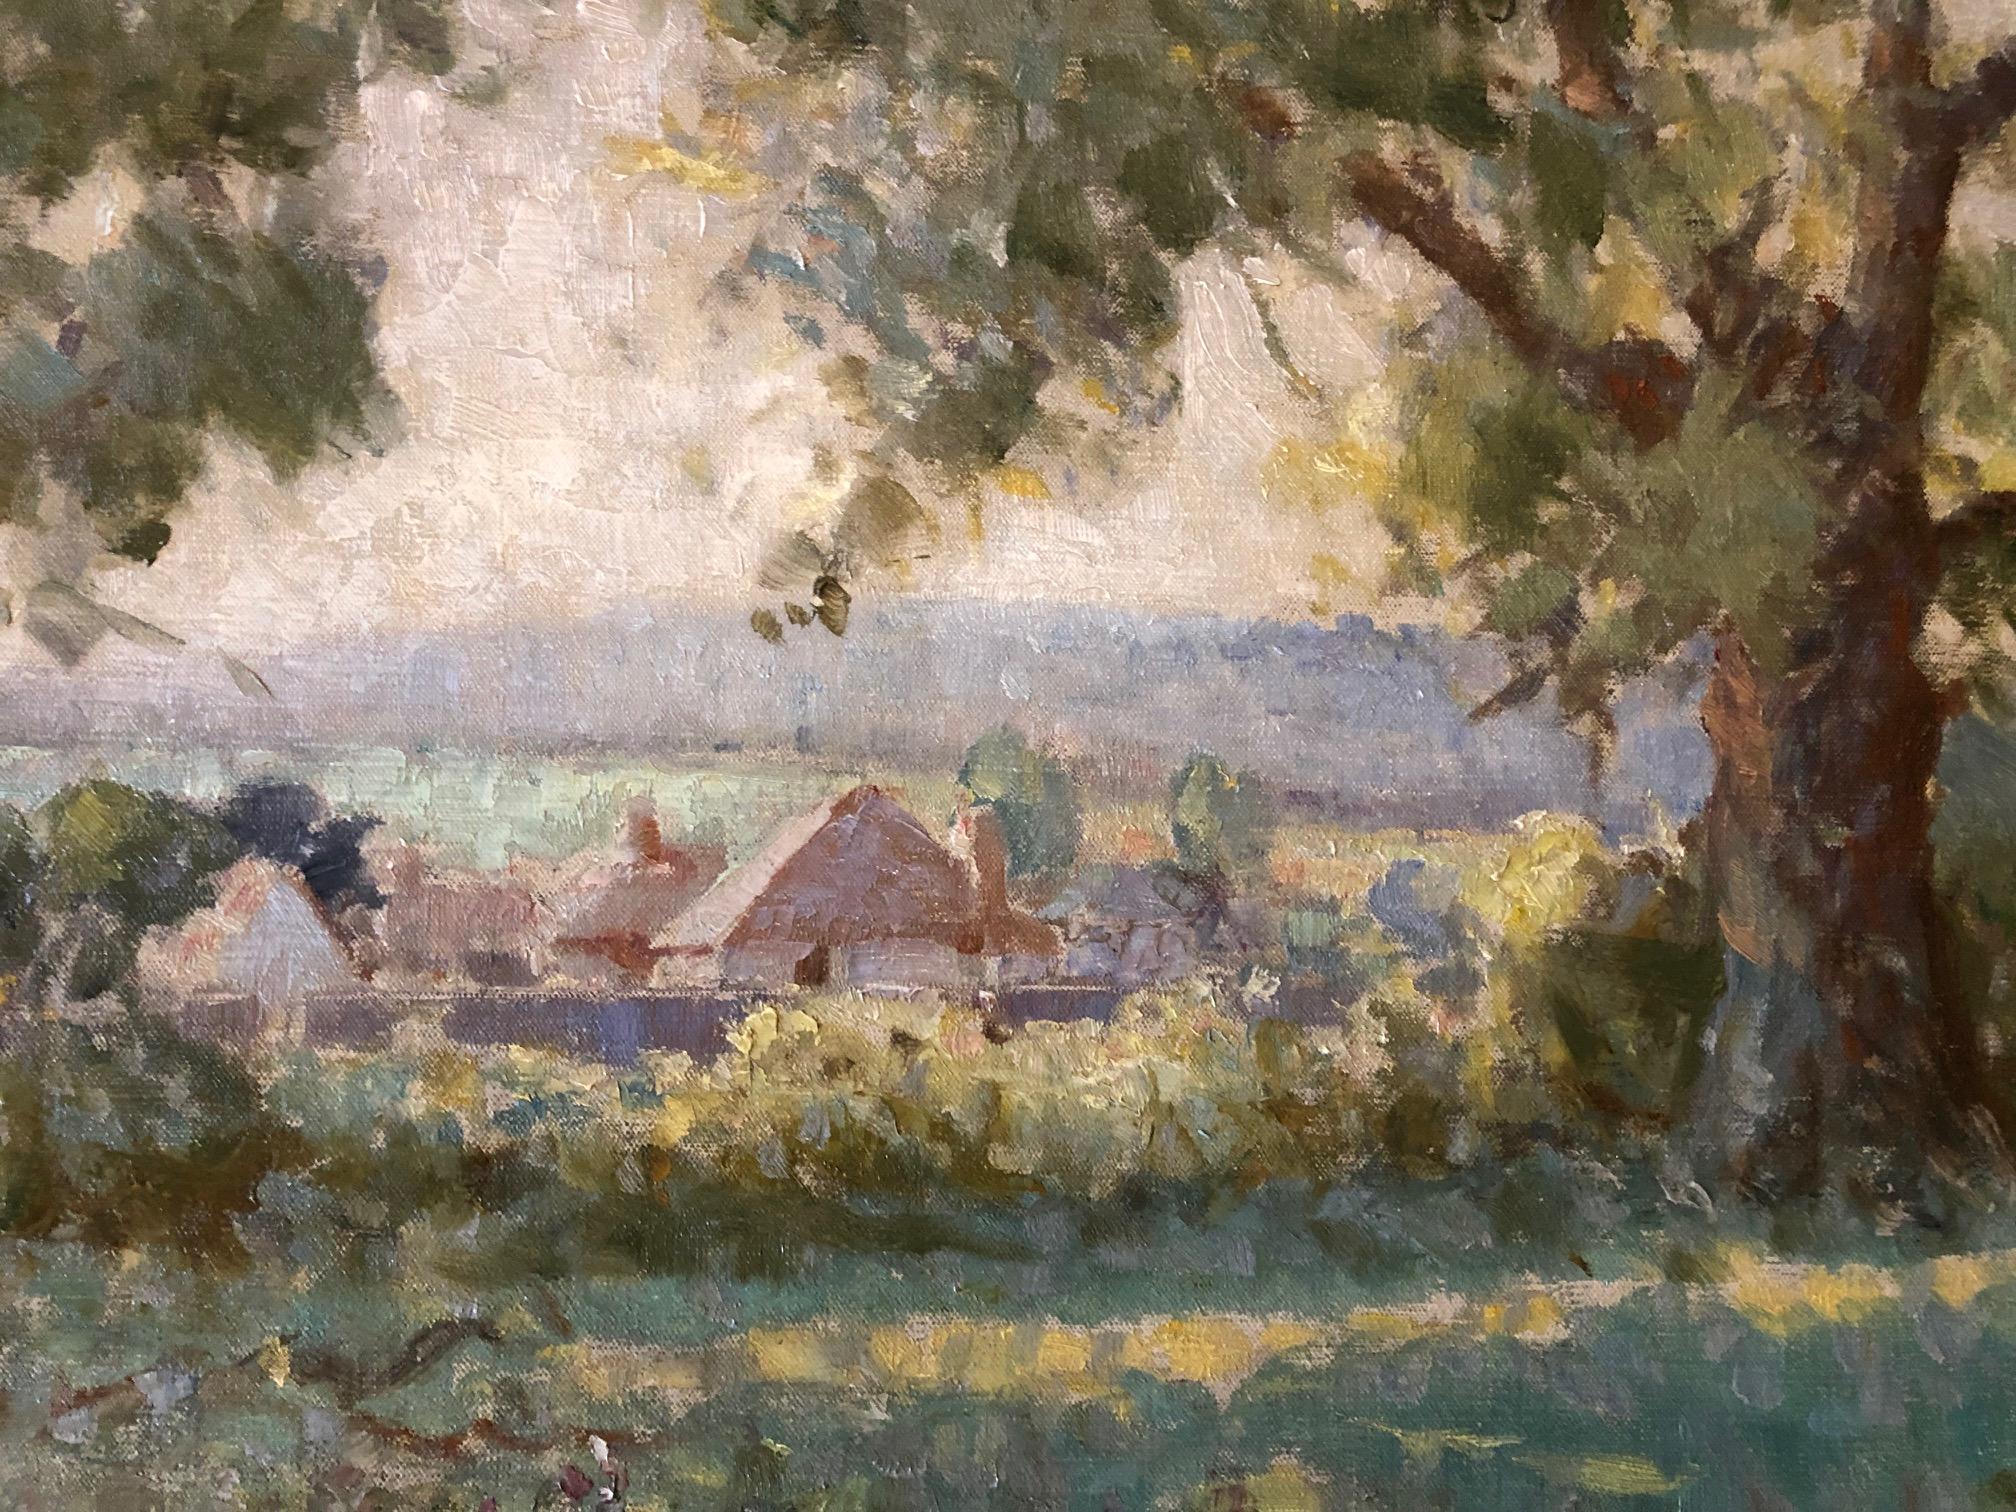 Findon, Sussex English Impressionist oil Sun dappled trees, fields and buildings - Art by William Lee Hankey